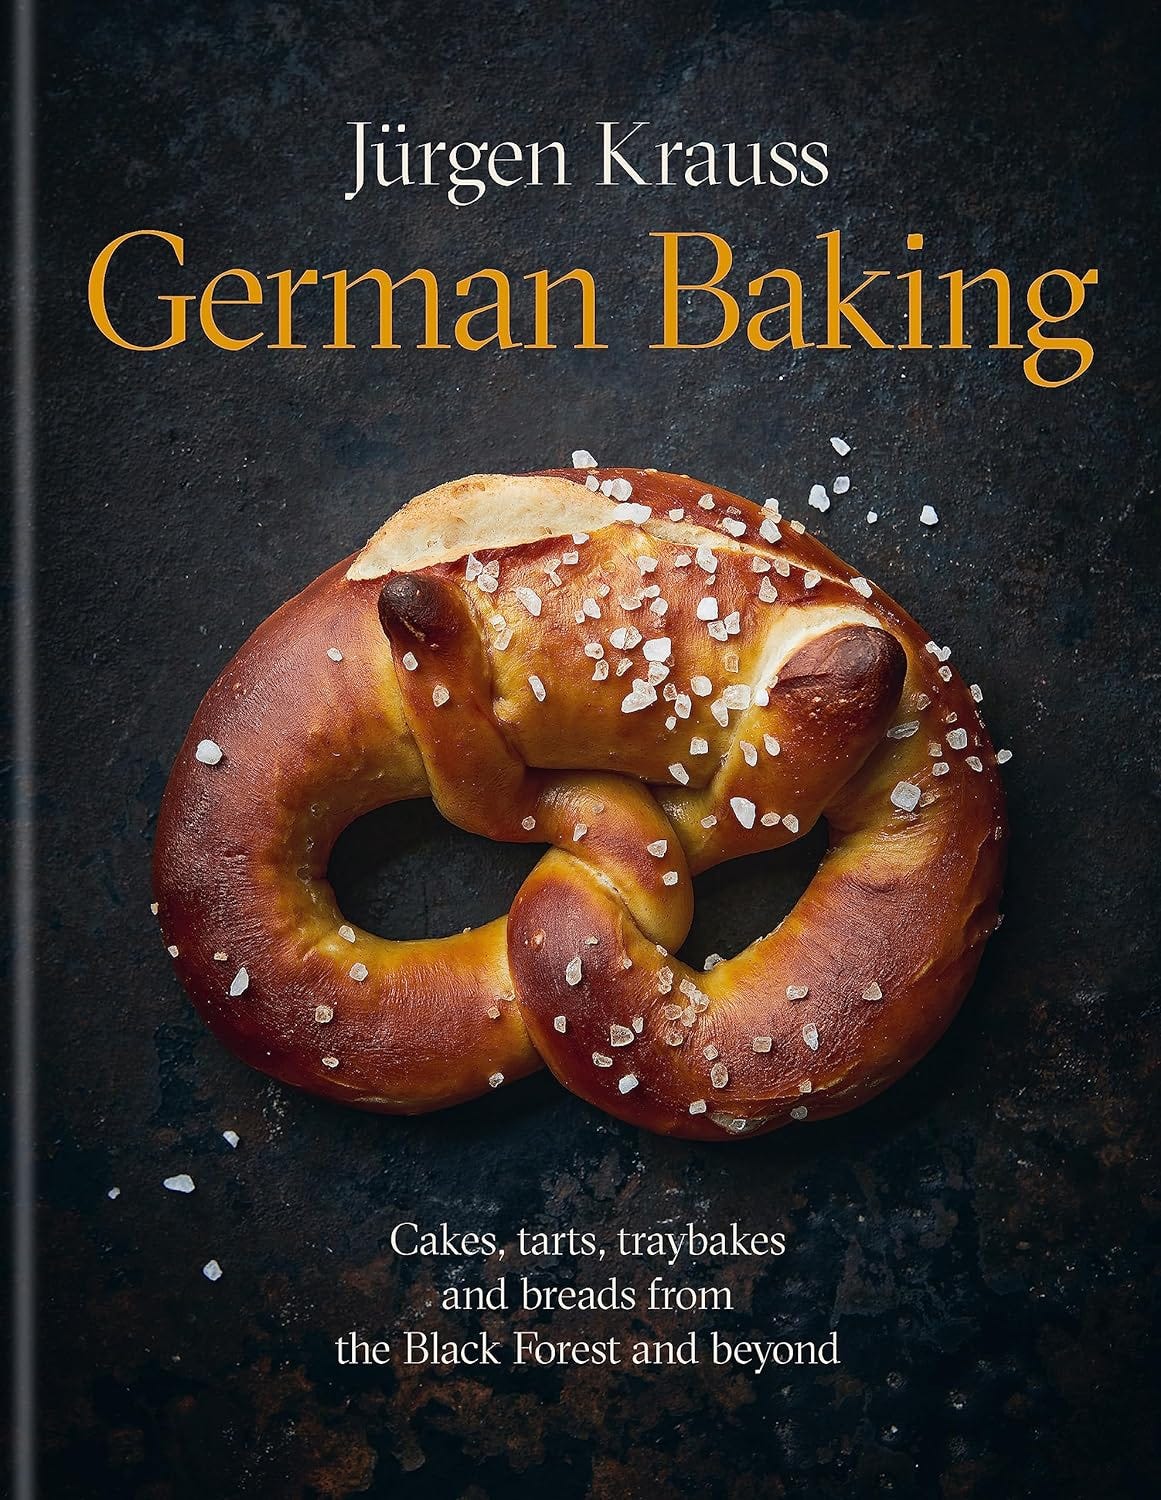 The cover of German Baking. Gold and white text on a black background with a close-up of a  rocksalt-encrusted twisted pretzel in all its burnished glory